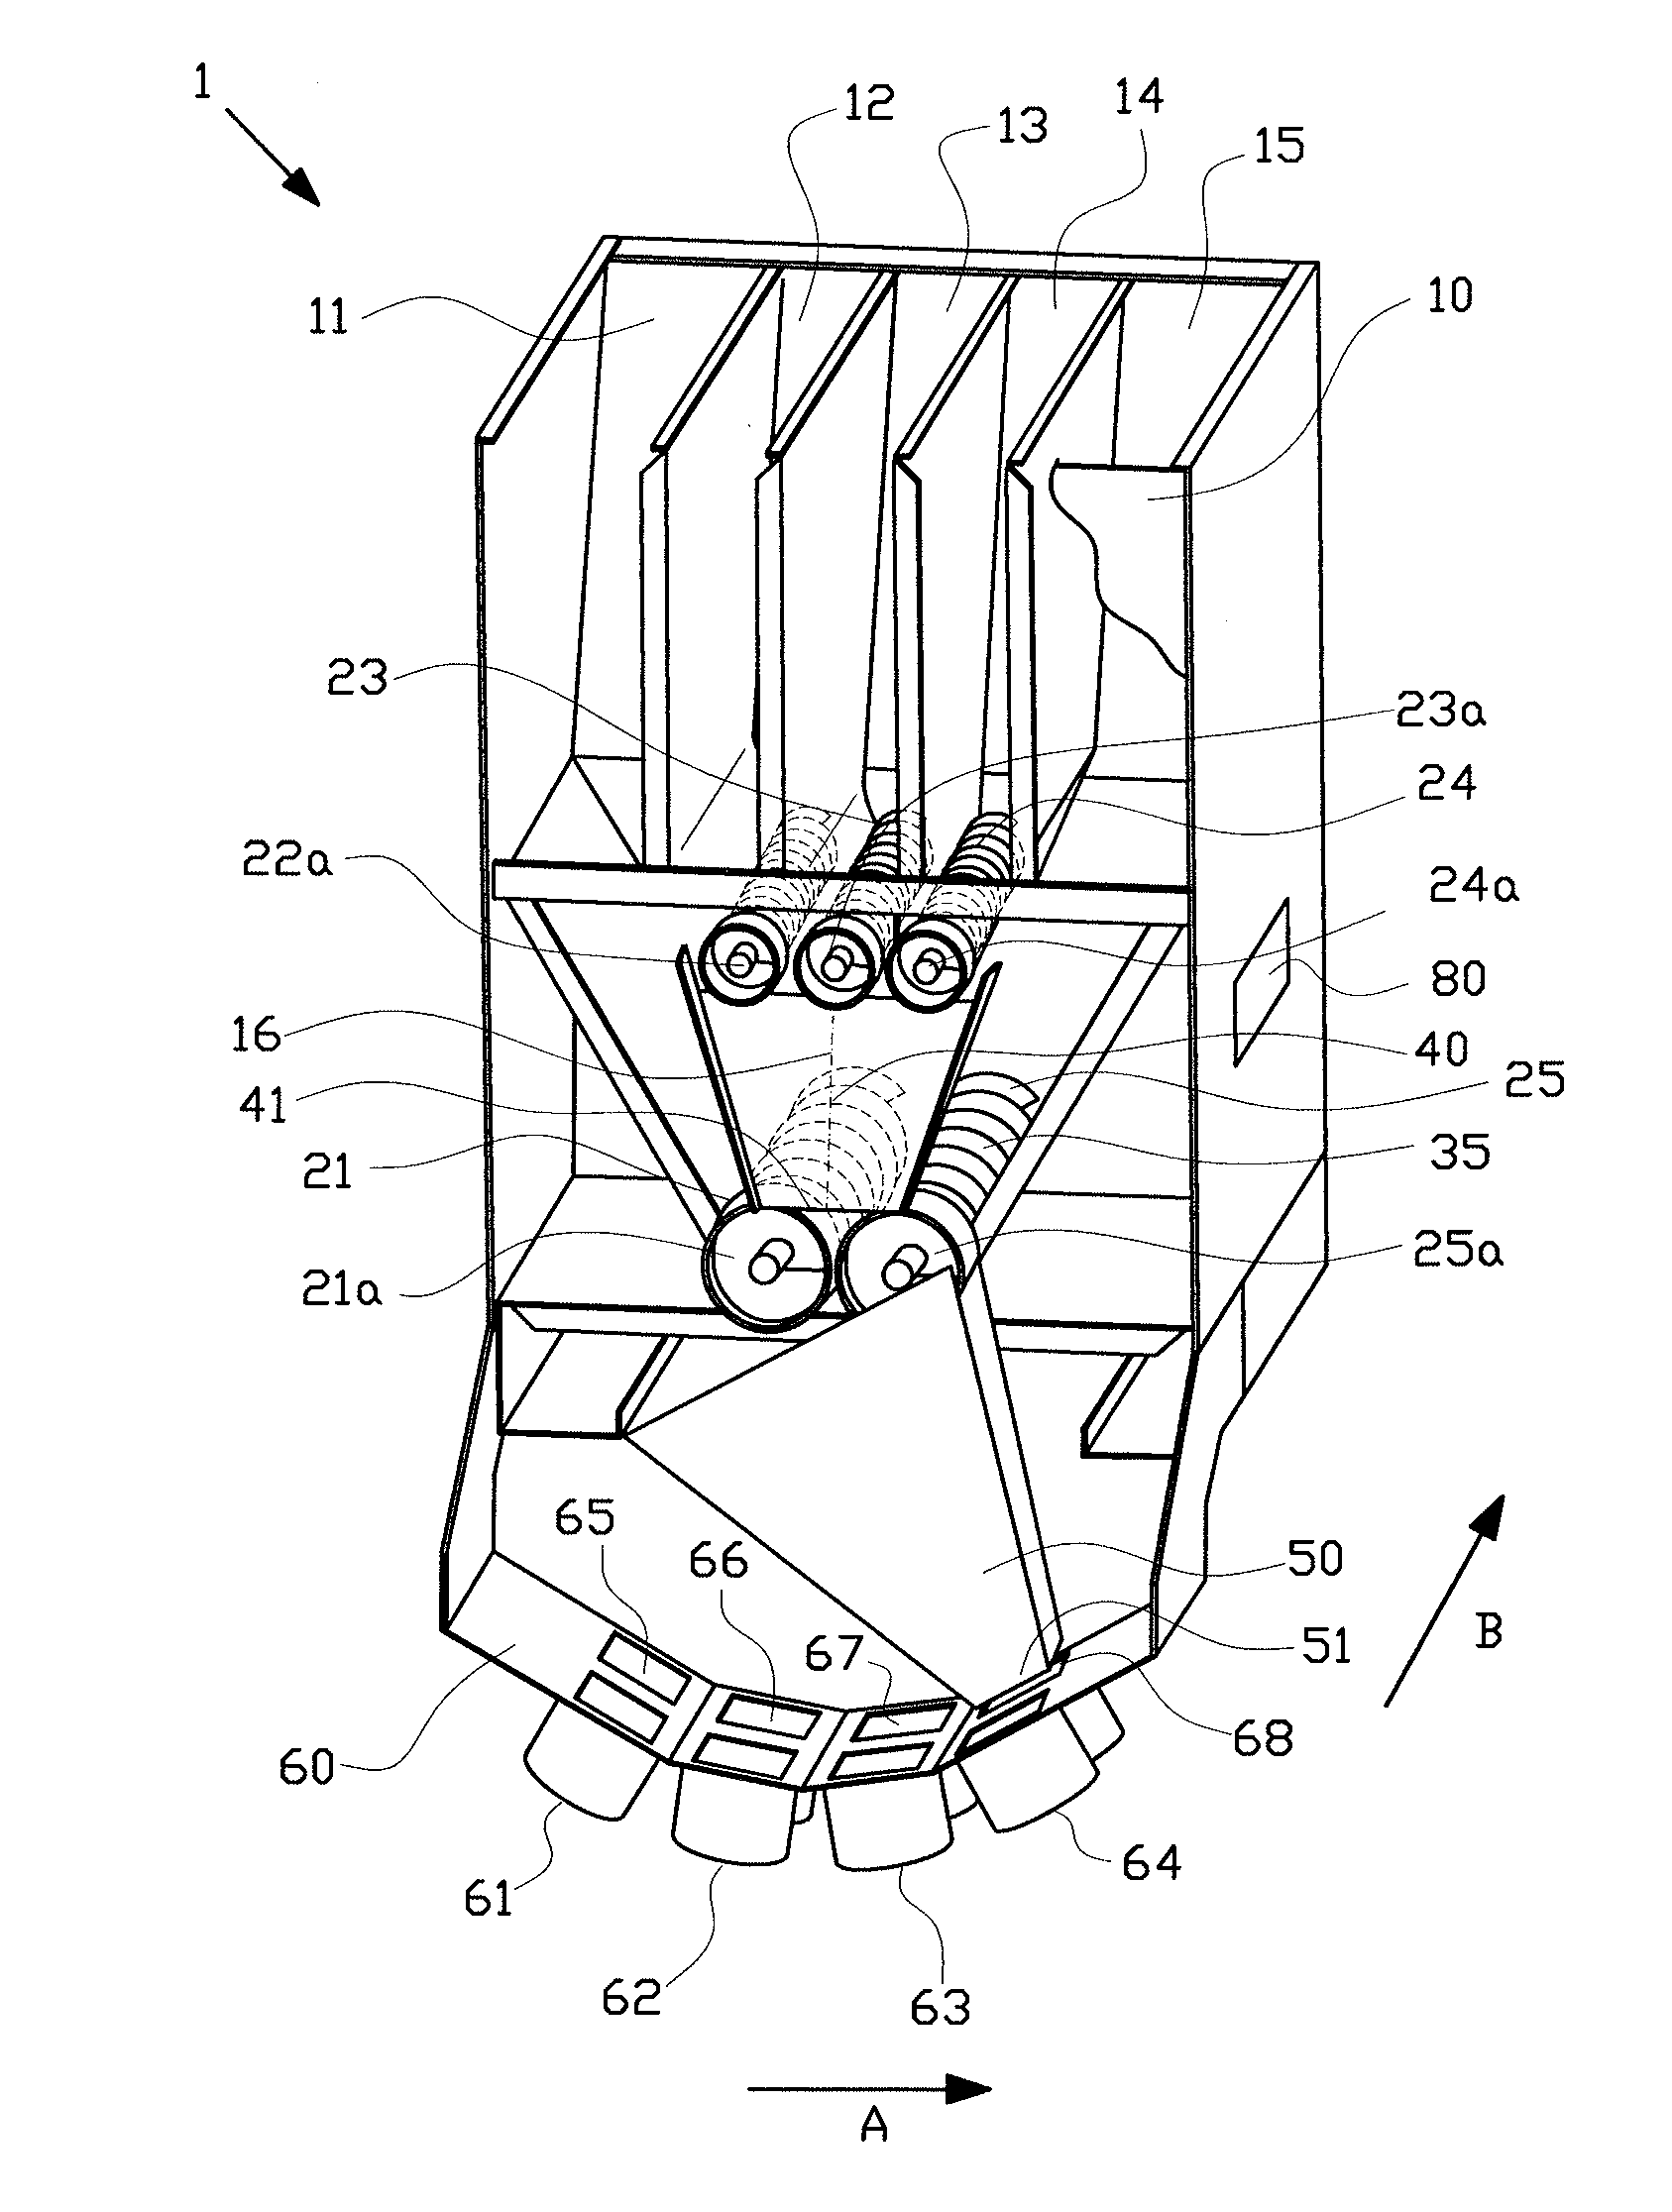 Mixing and dosing device for cattle feed